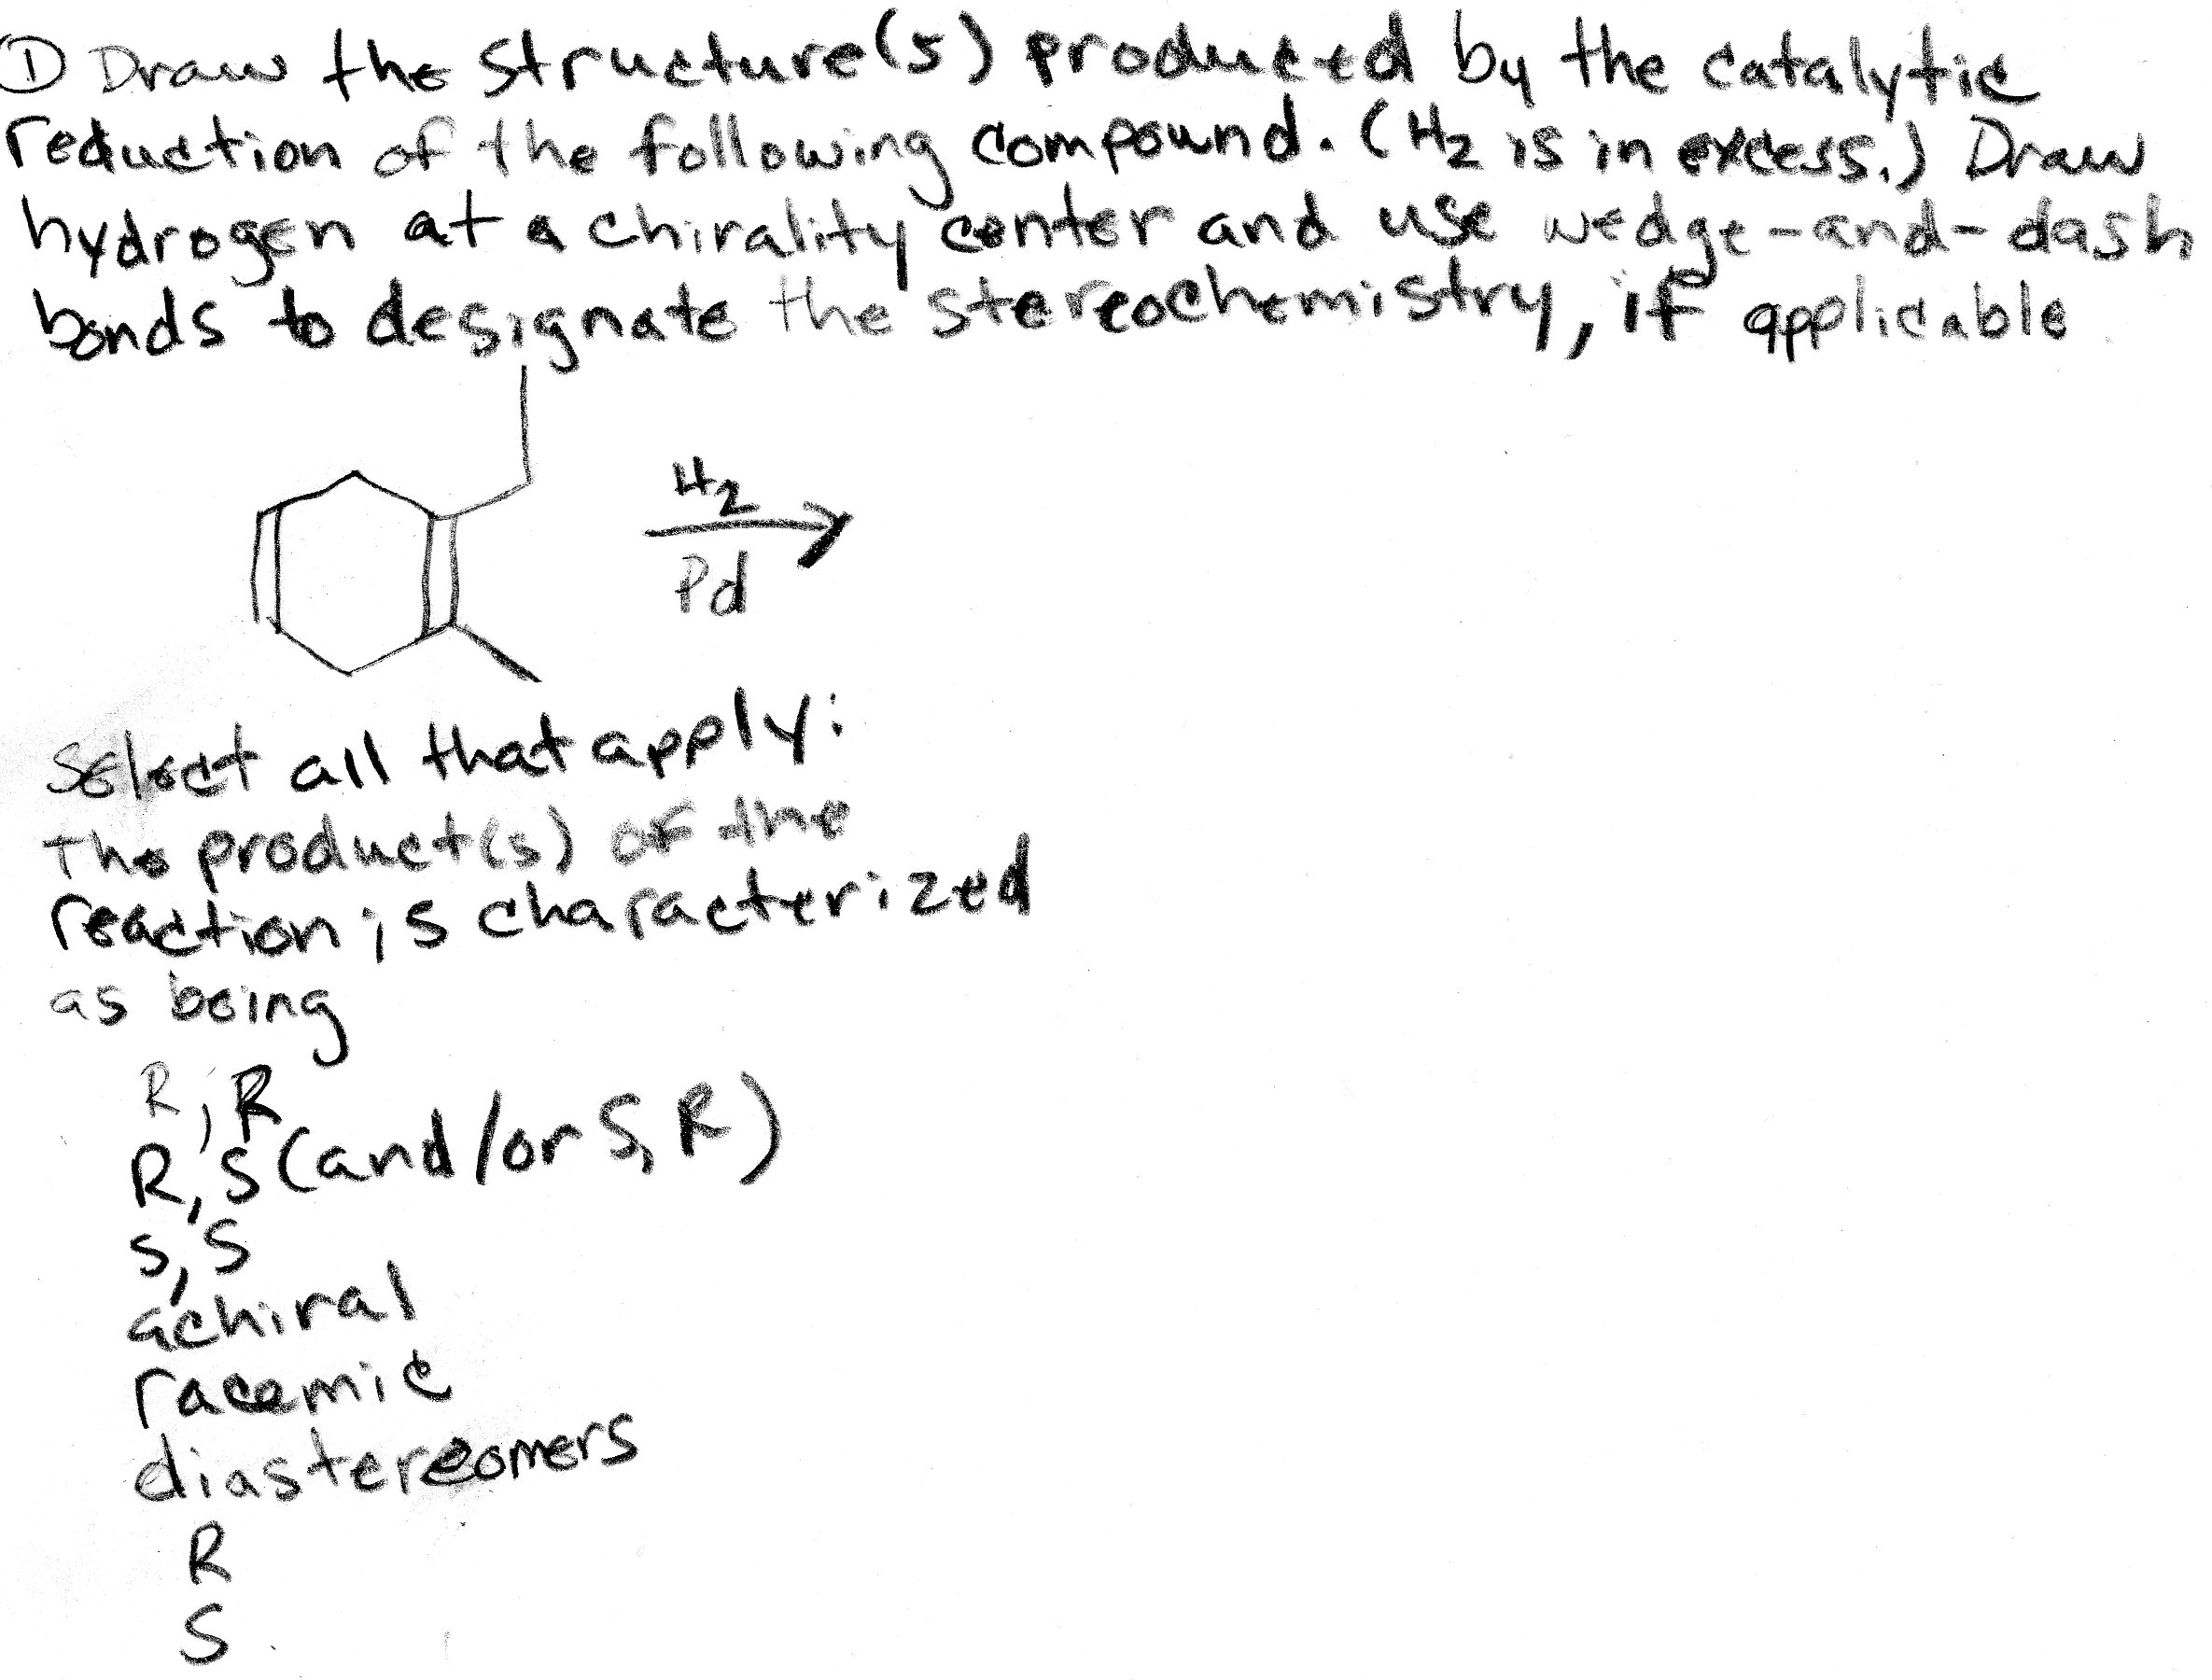 Solved Draw the structure(s) produced by the catalytic